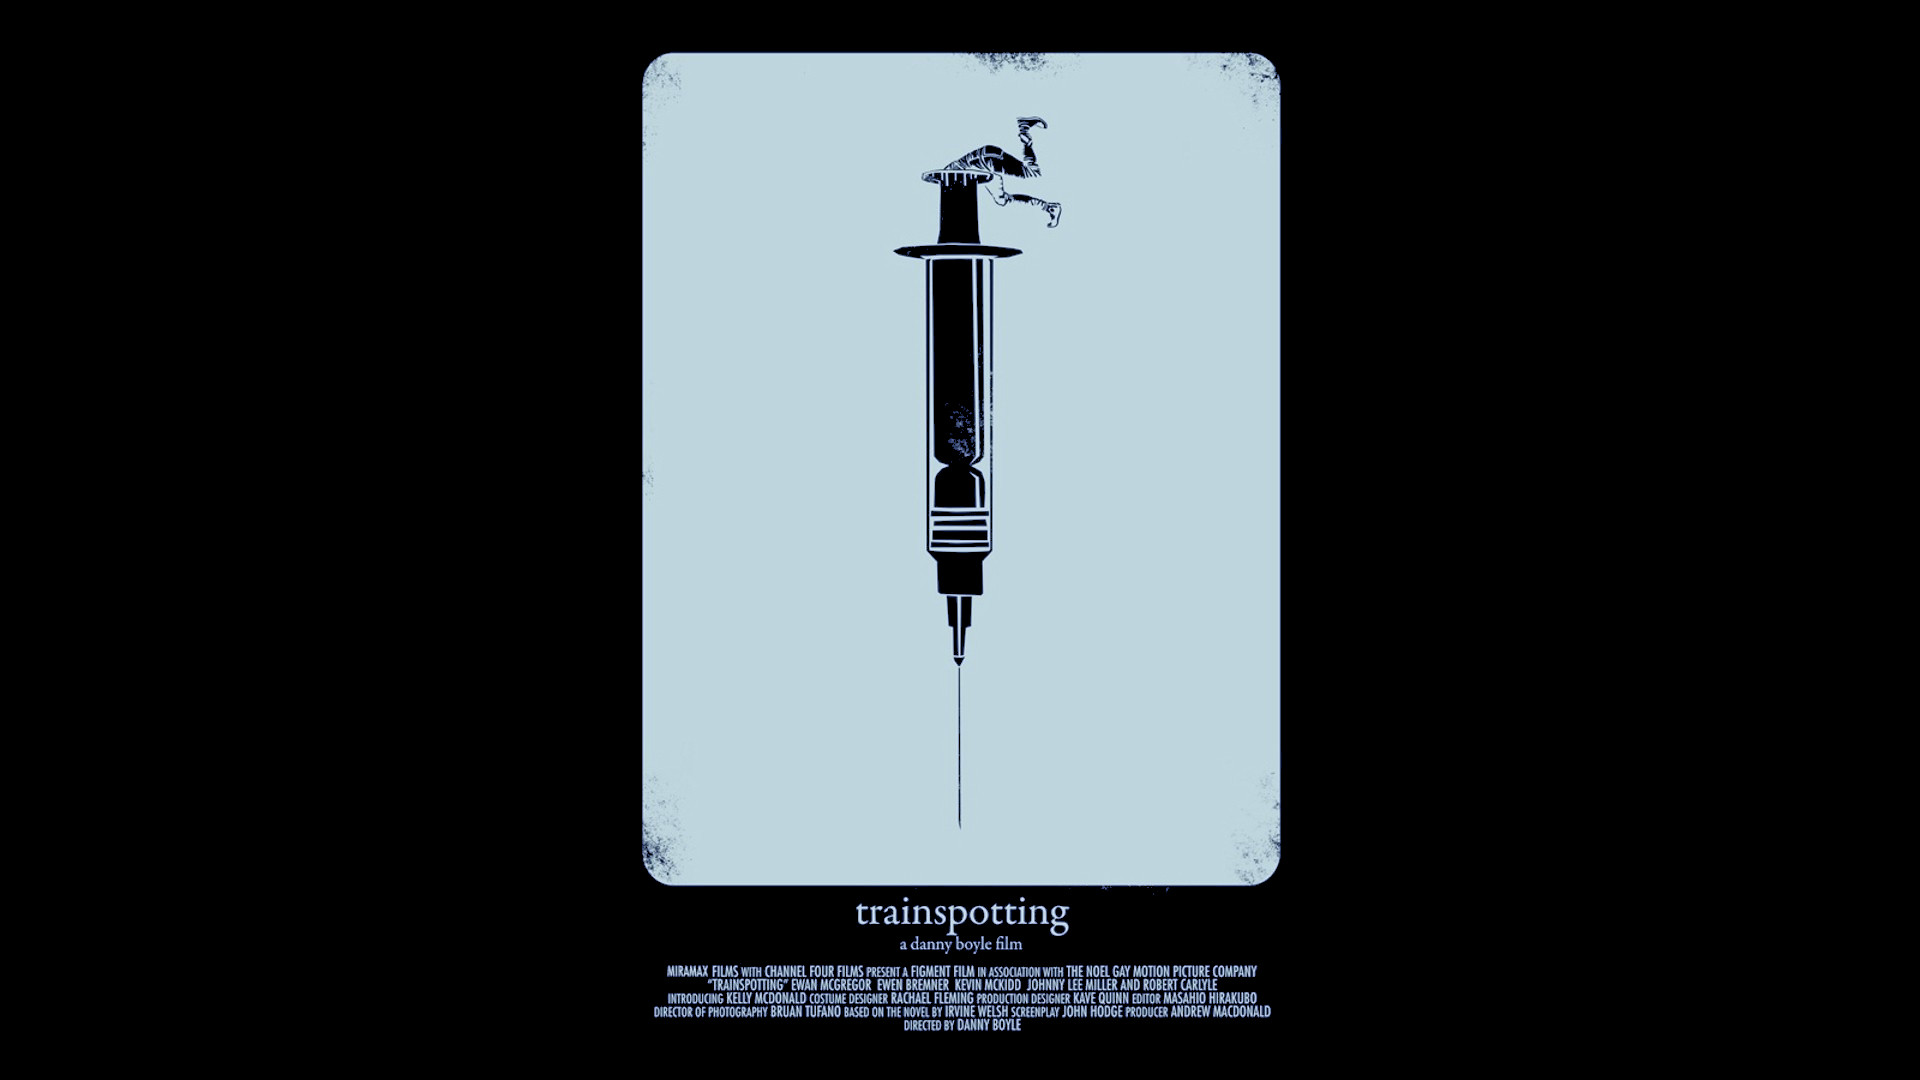 General 1920x1080 Trainspotting movies poster syringe